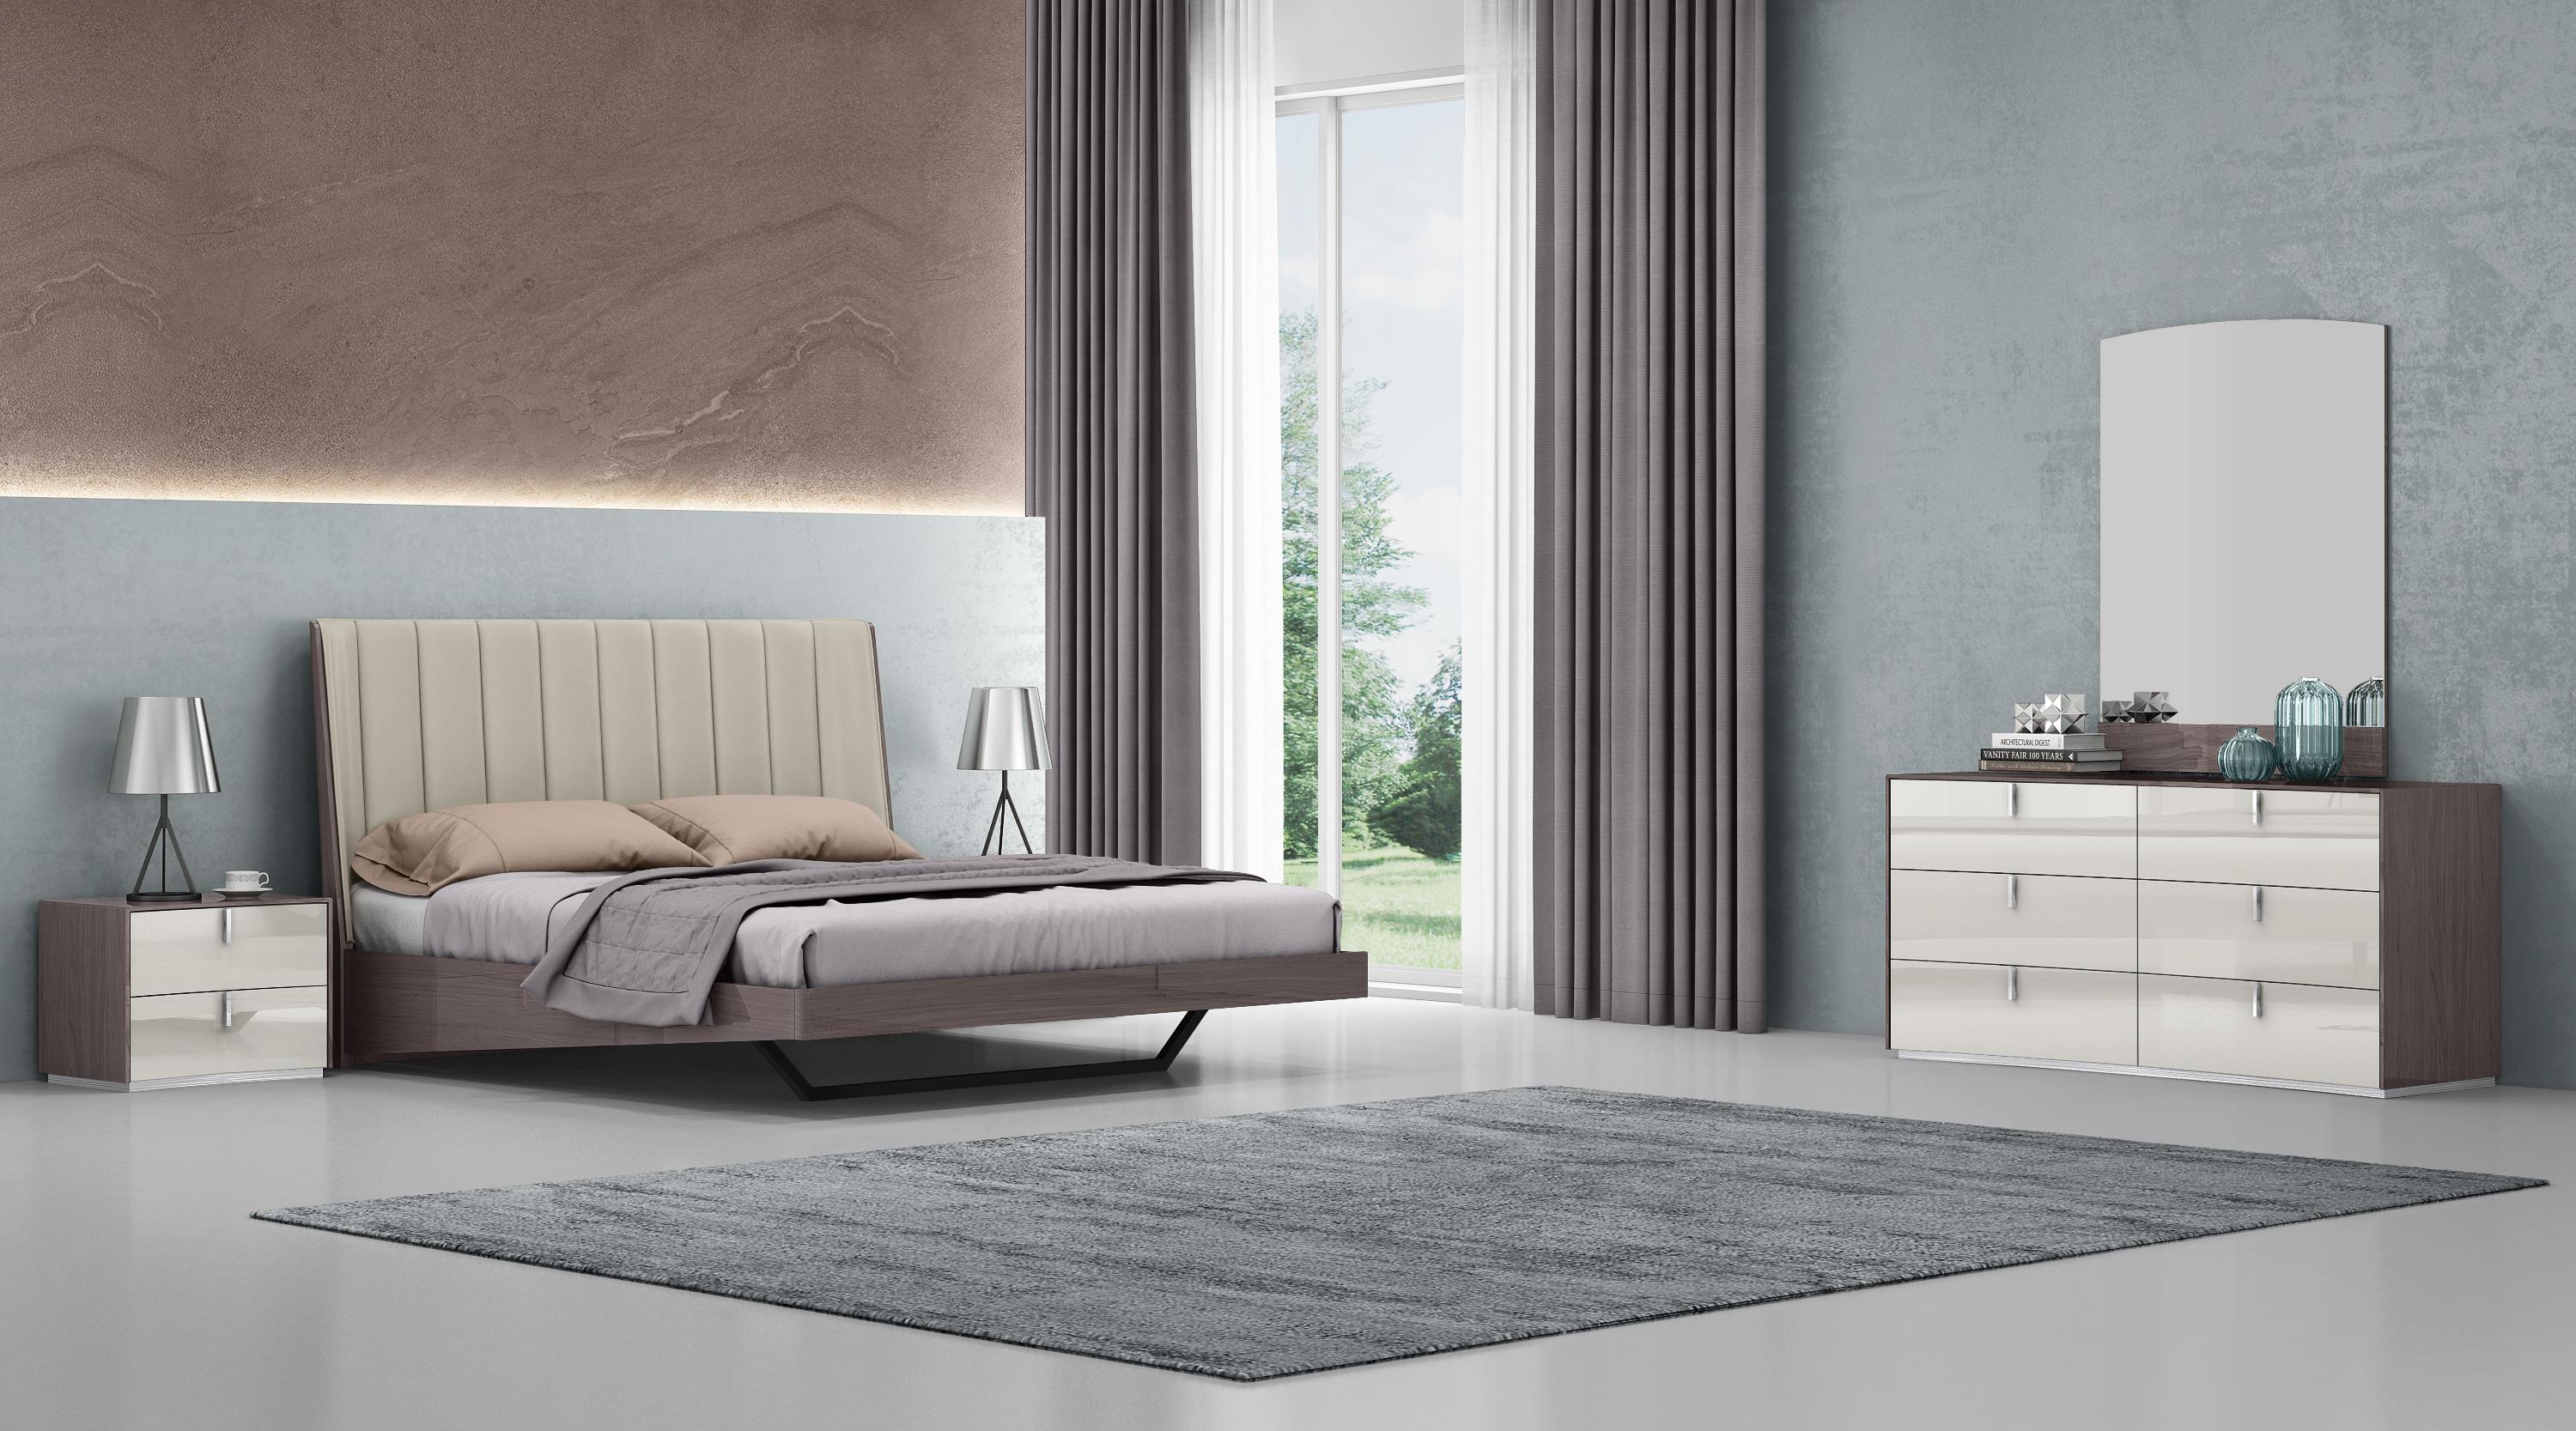 

    
BK1754-GRY/LGRY Berlin Bed
